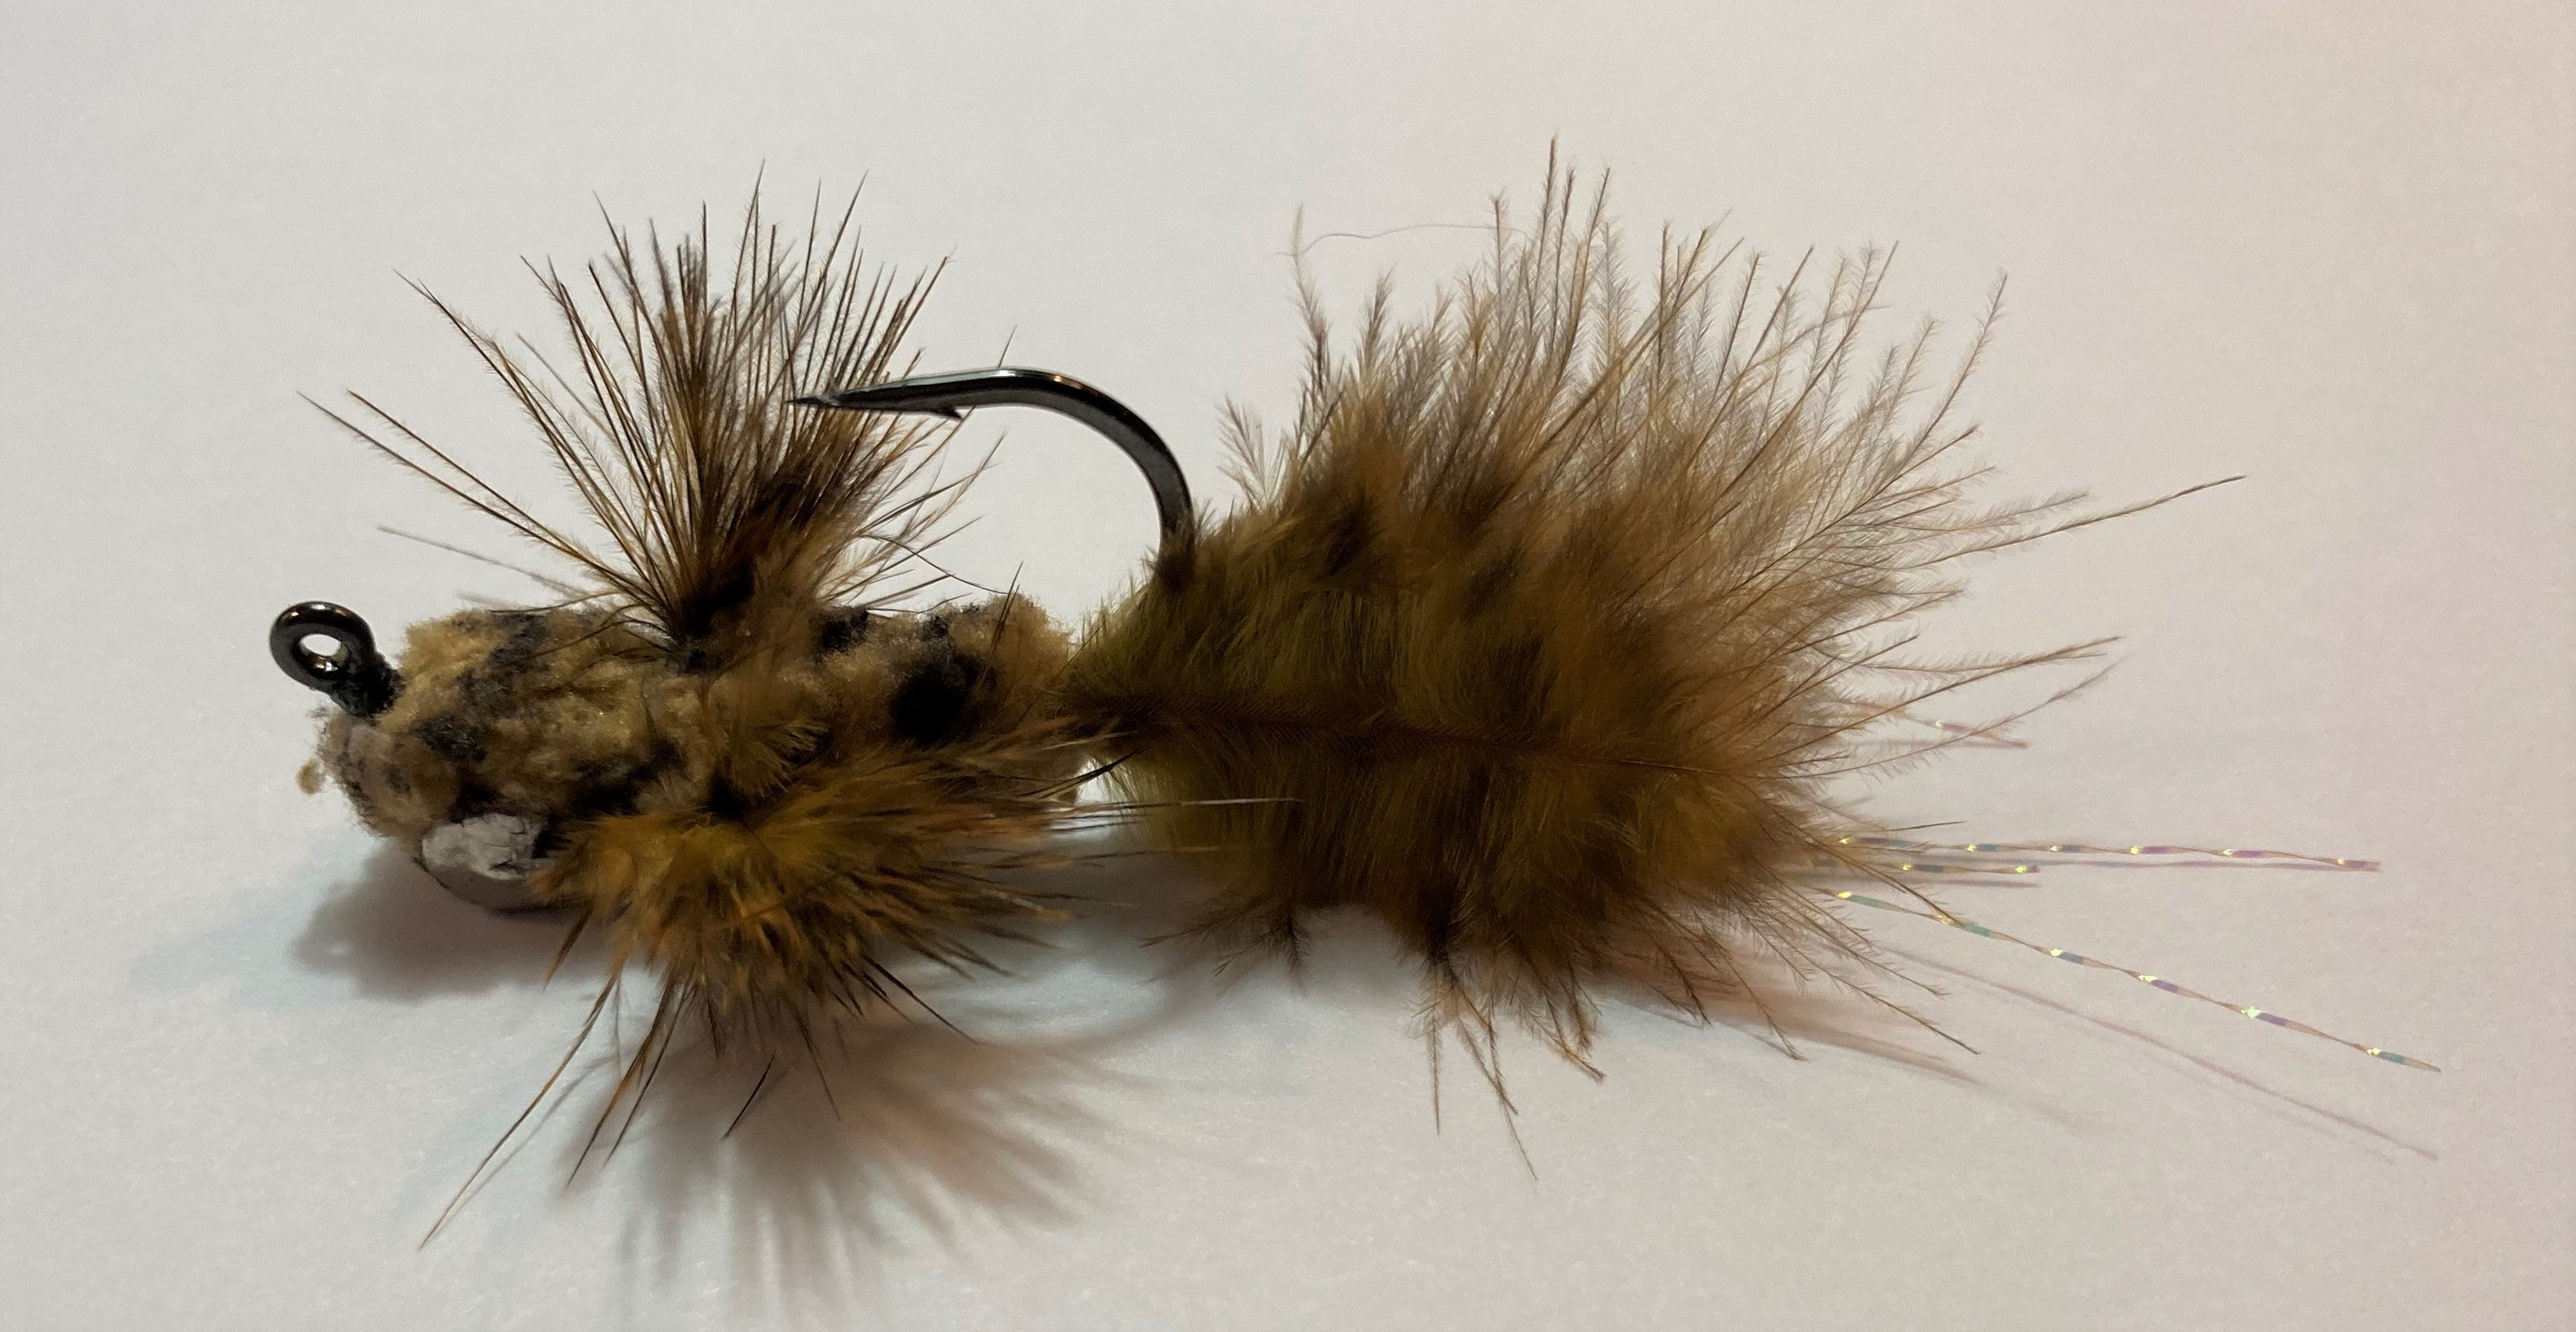 Delaware River Club Online Fly Shop — Don's Jig Sculpin